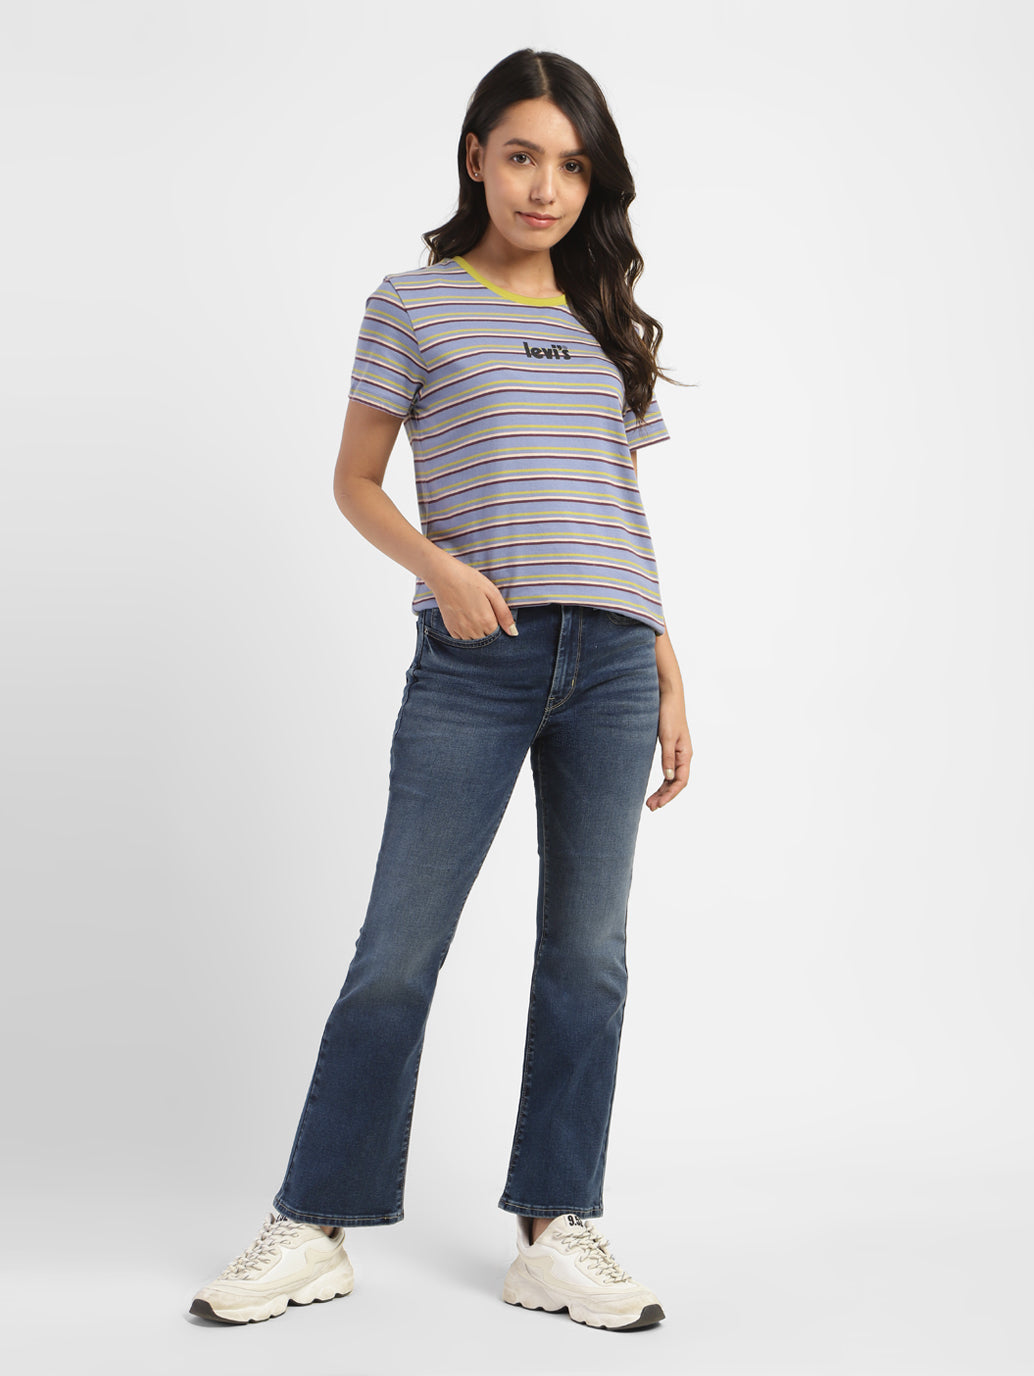 Levi's Women's 725 High Rise Bootcut Jeans 